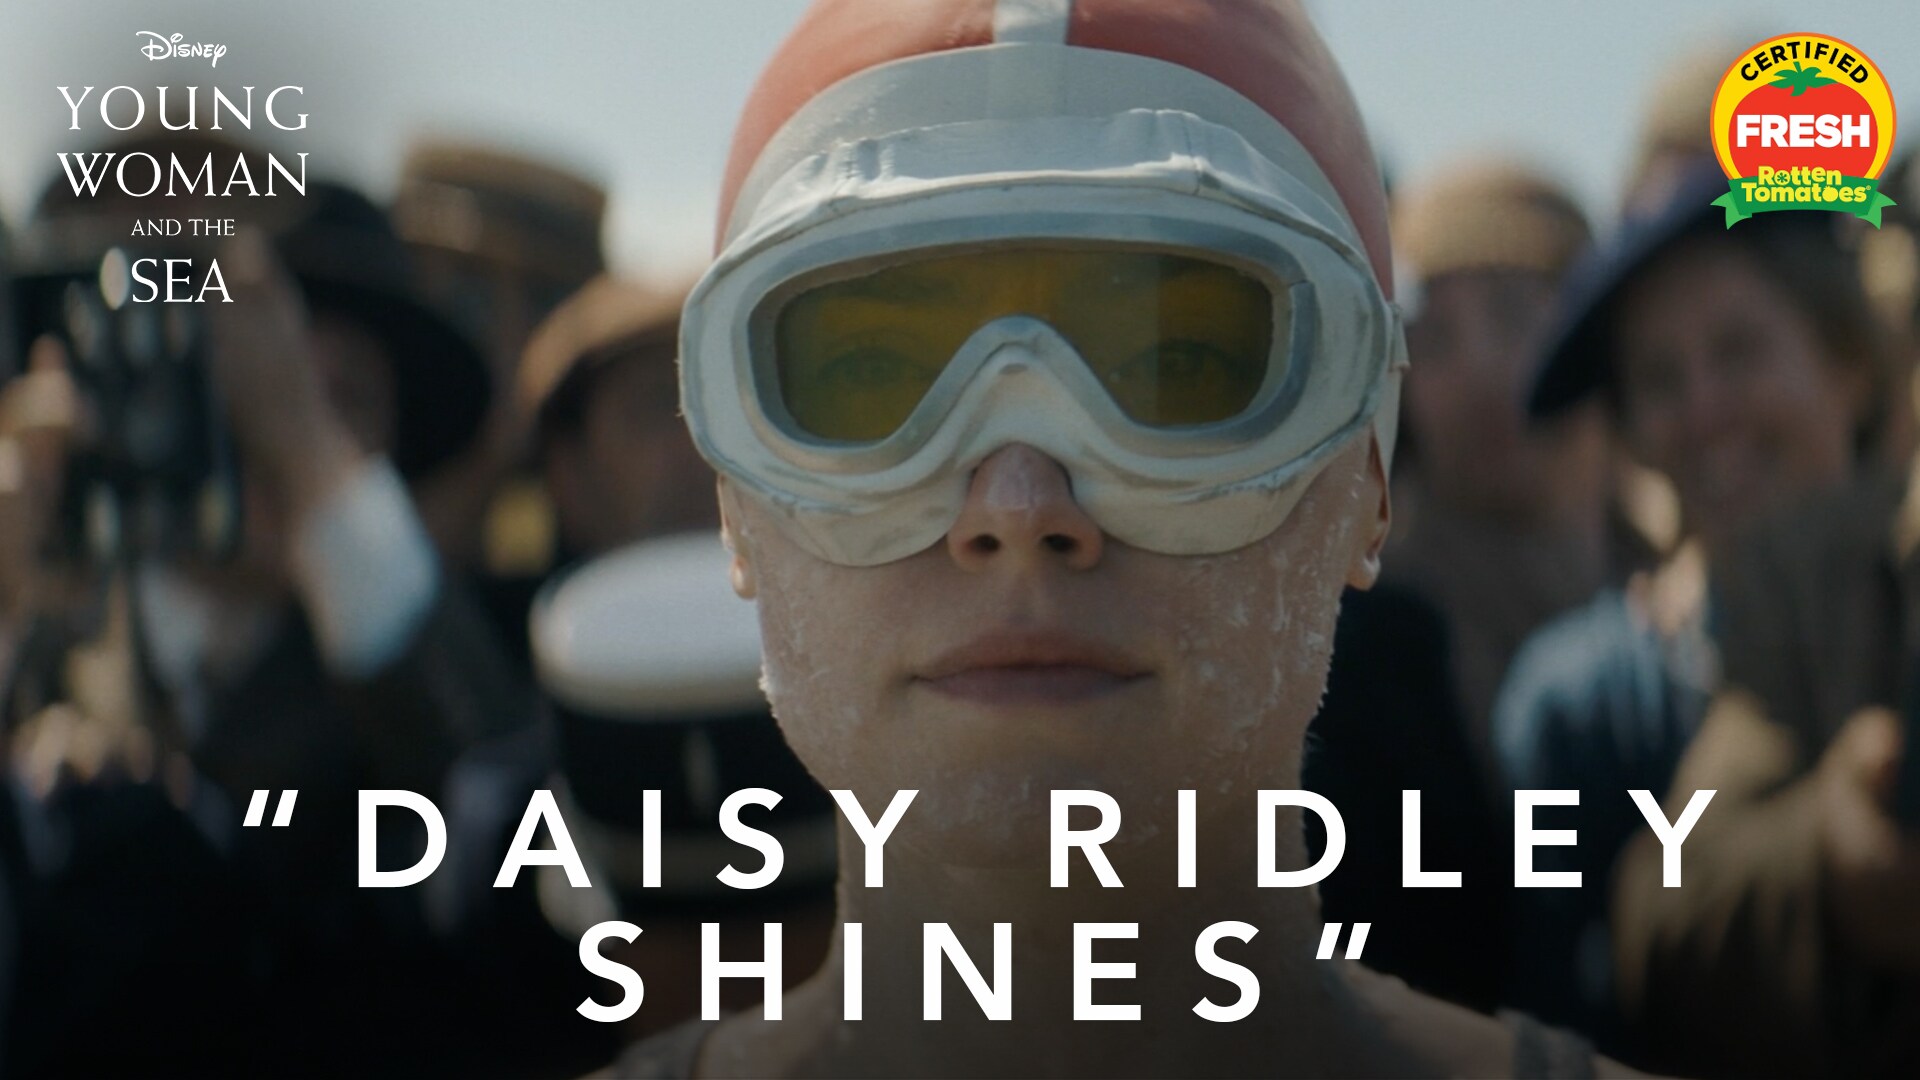 Young Woman and the Sea | "Daisy Ridley Shines" | In Select Theaters Now